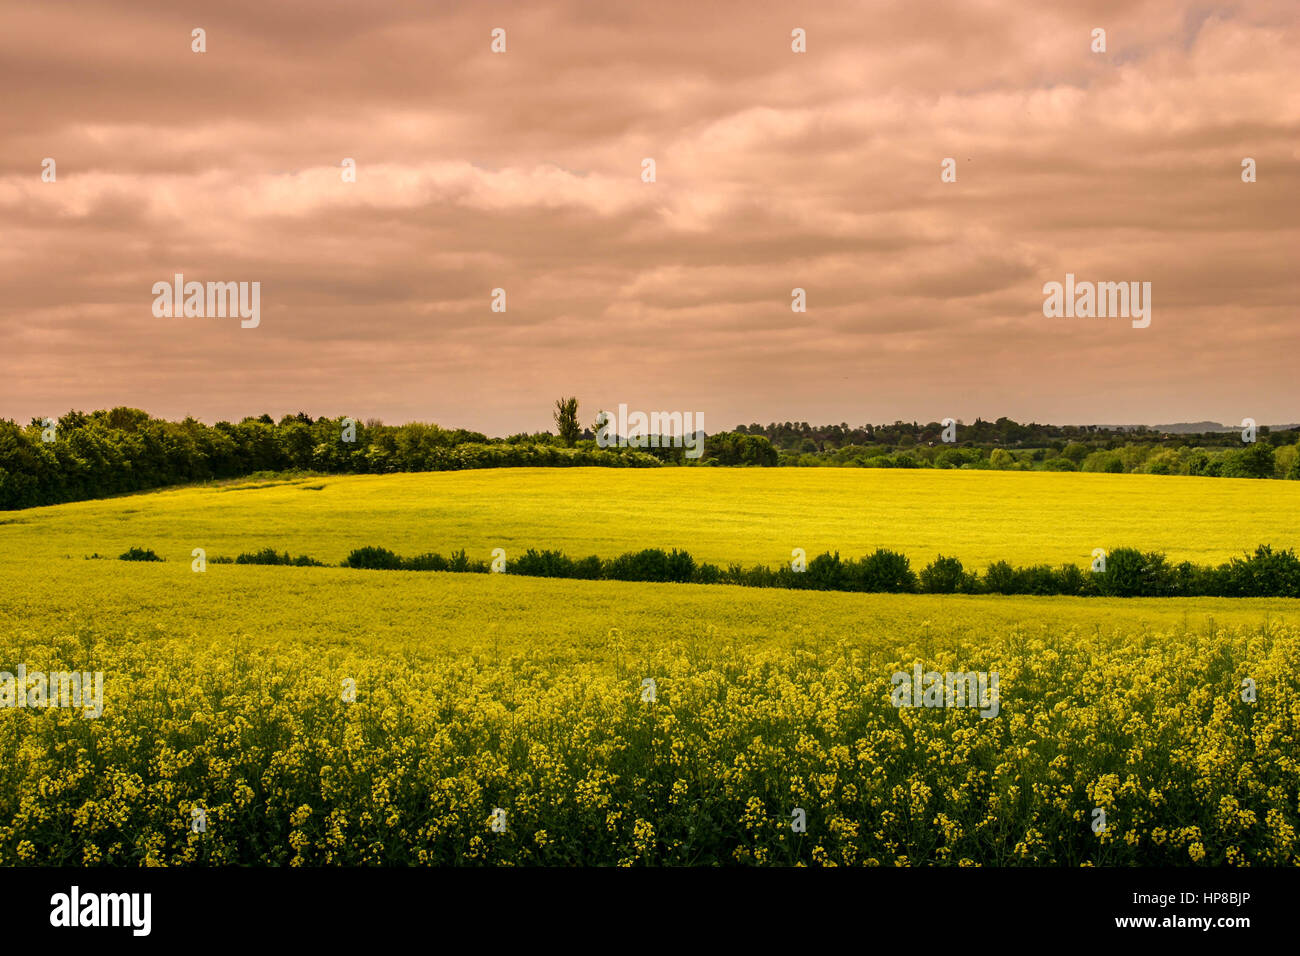 Beautiful English landscape with yellow mustard seed flowers in fields Stock Photo